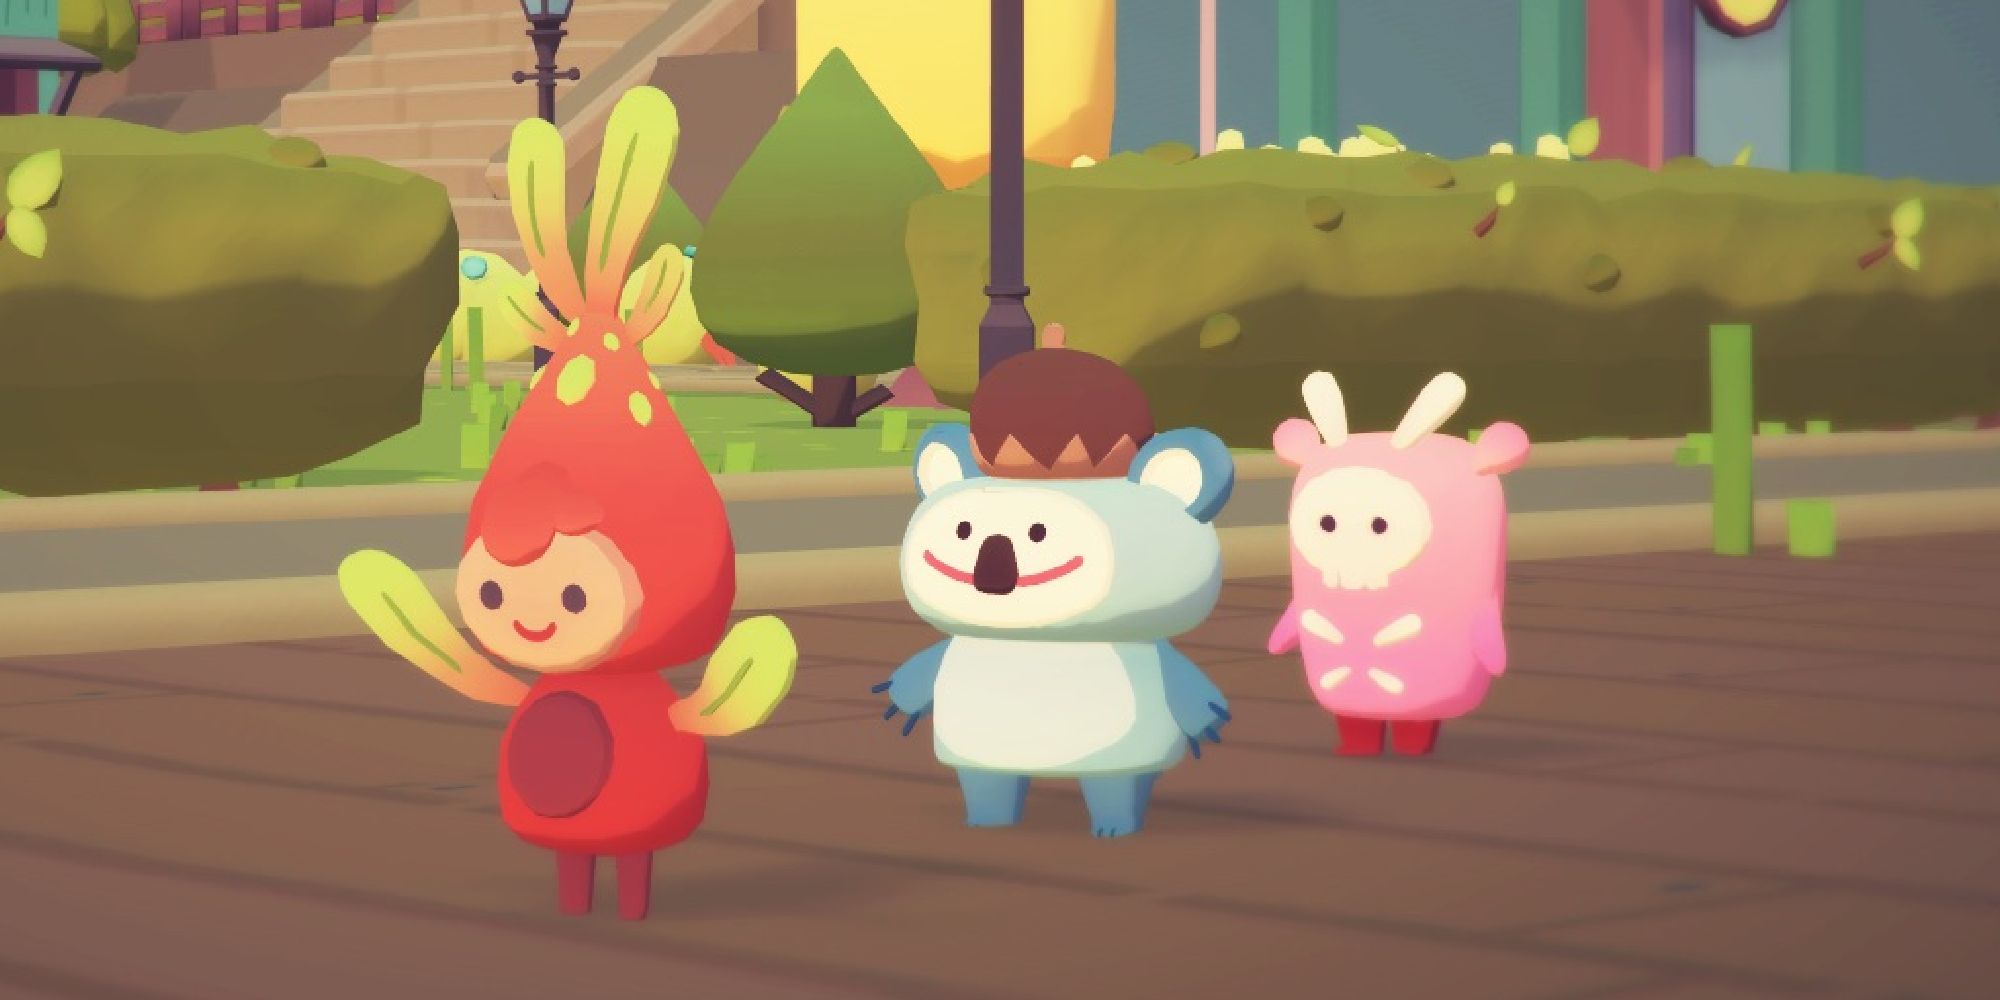 three ooblets with Kingwa in the center